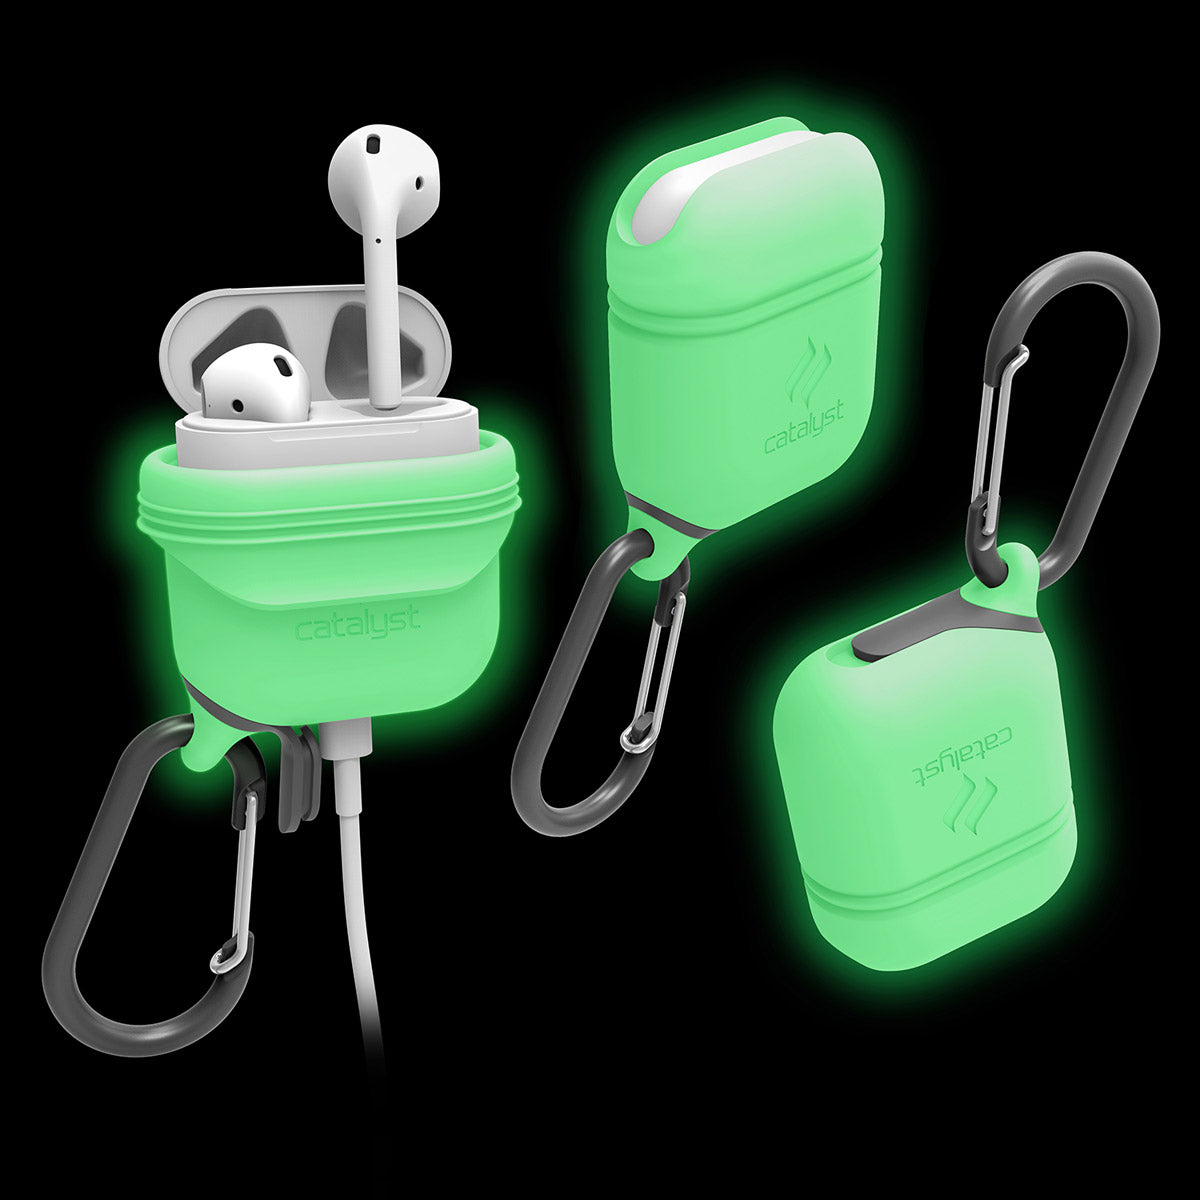 Catalyst Waterproof Case for Airpods Gen 1 & 2 special edition + carabiner showing 3 airpods cases glow in the dark with carabiner attached